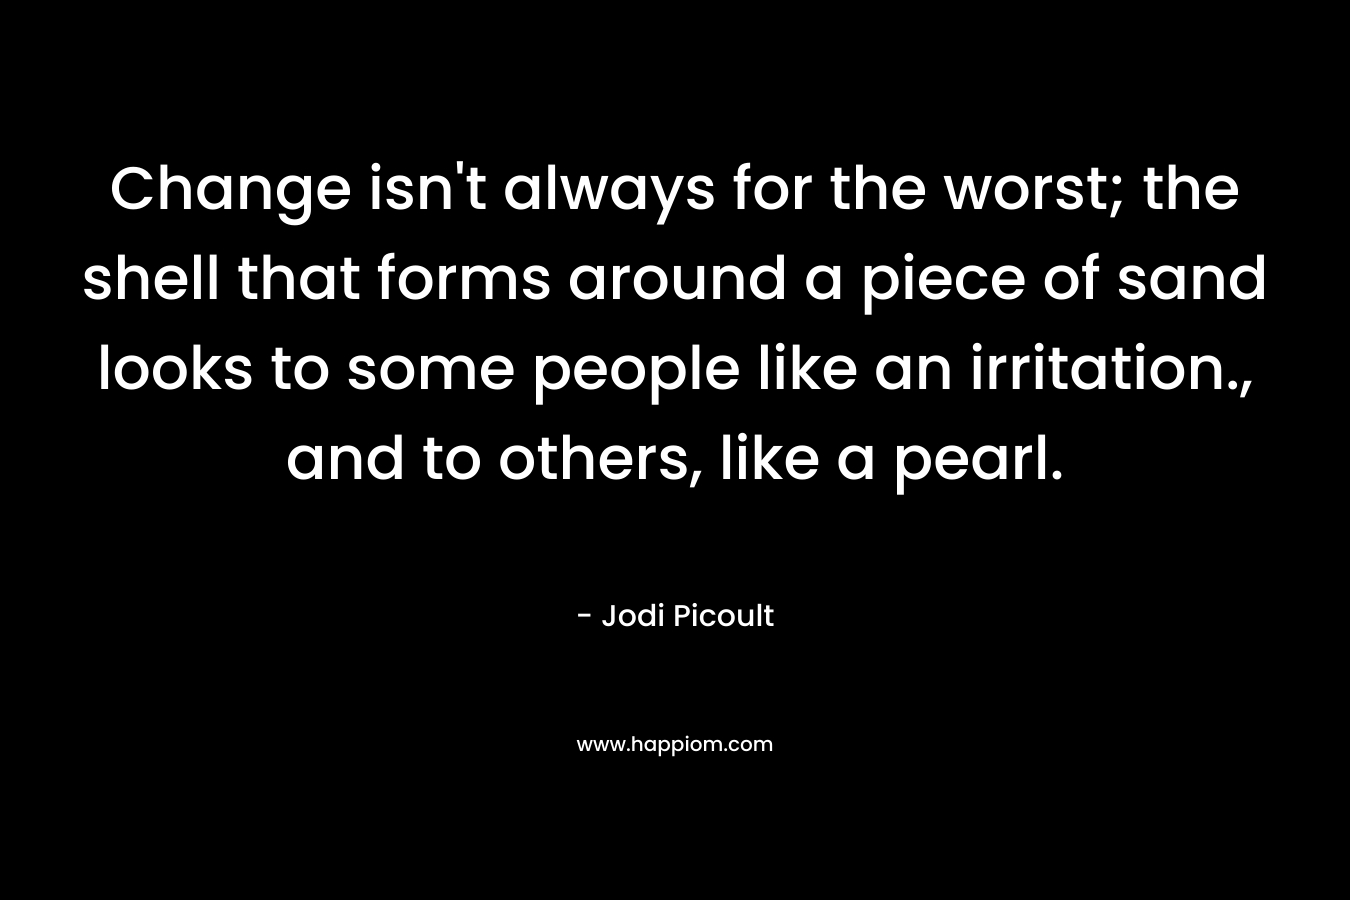 Change isn't always for the worst; the shell that forms around a piece of sand looks to some people like an irritation., and to others, like a pearl.